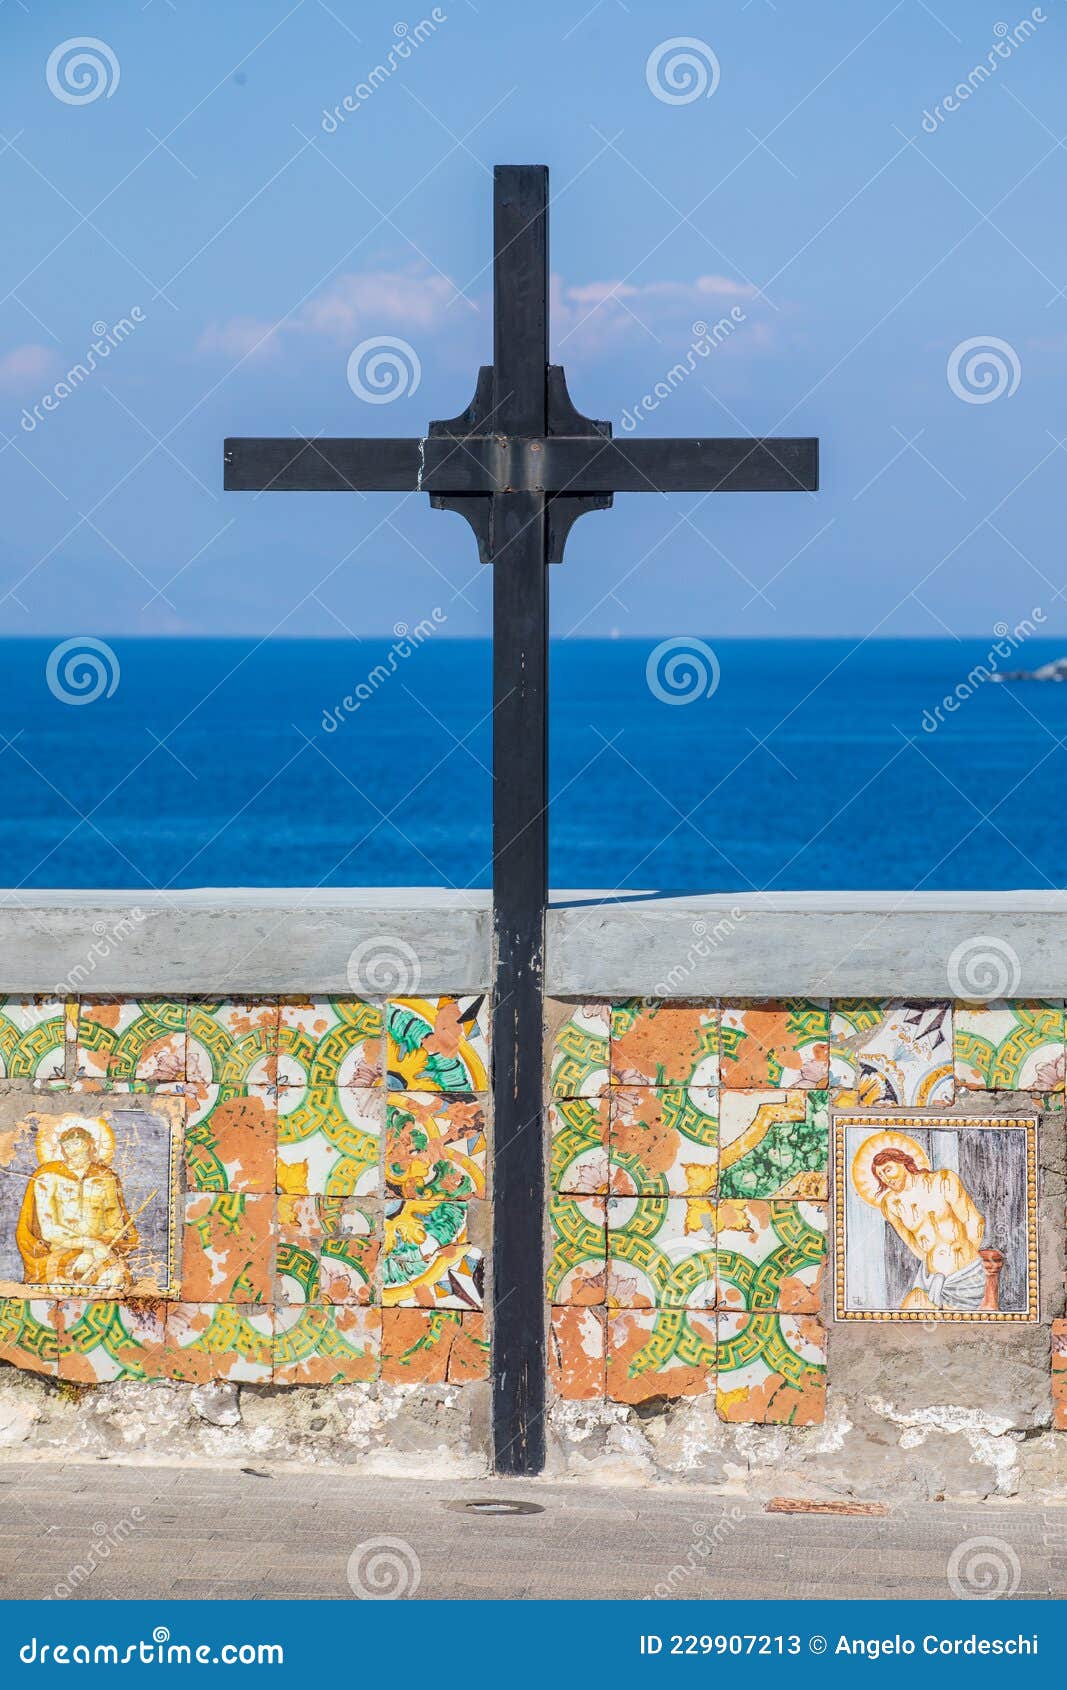 wooden cross with a low wall decorated with religious icons overlooking the sea. location: forio, soccorso church